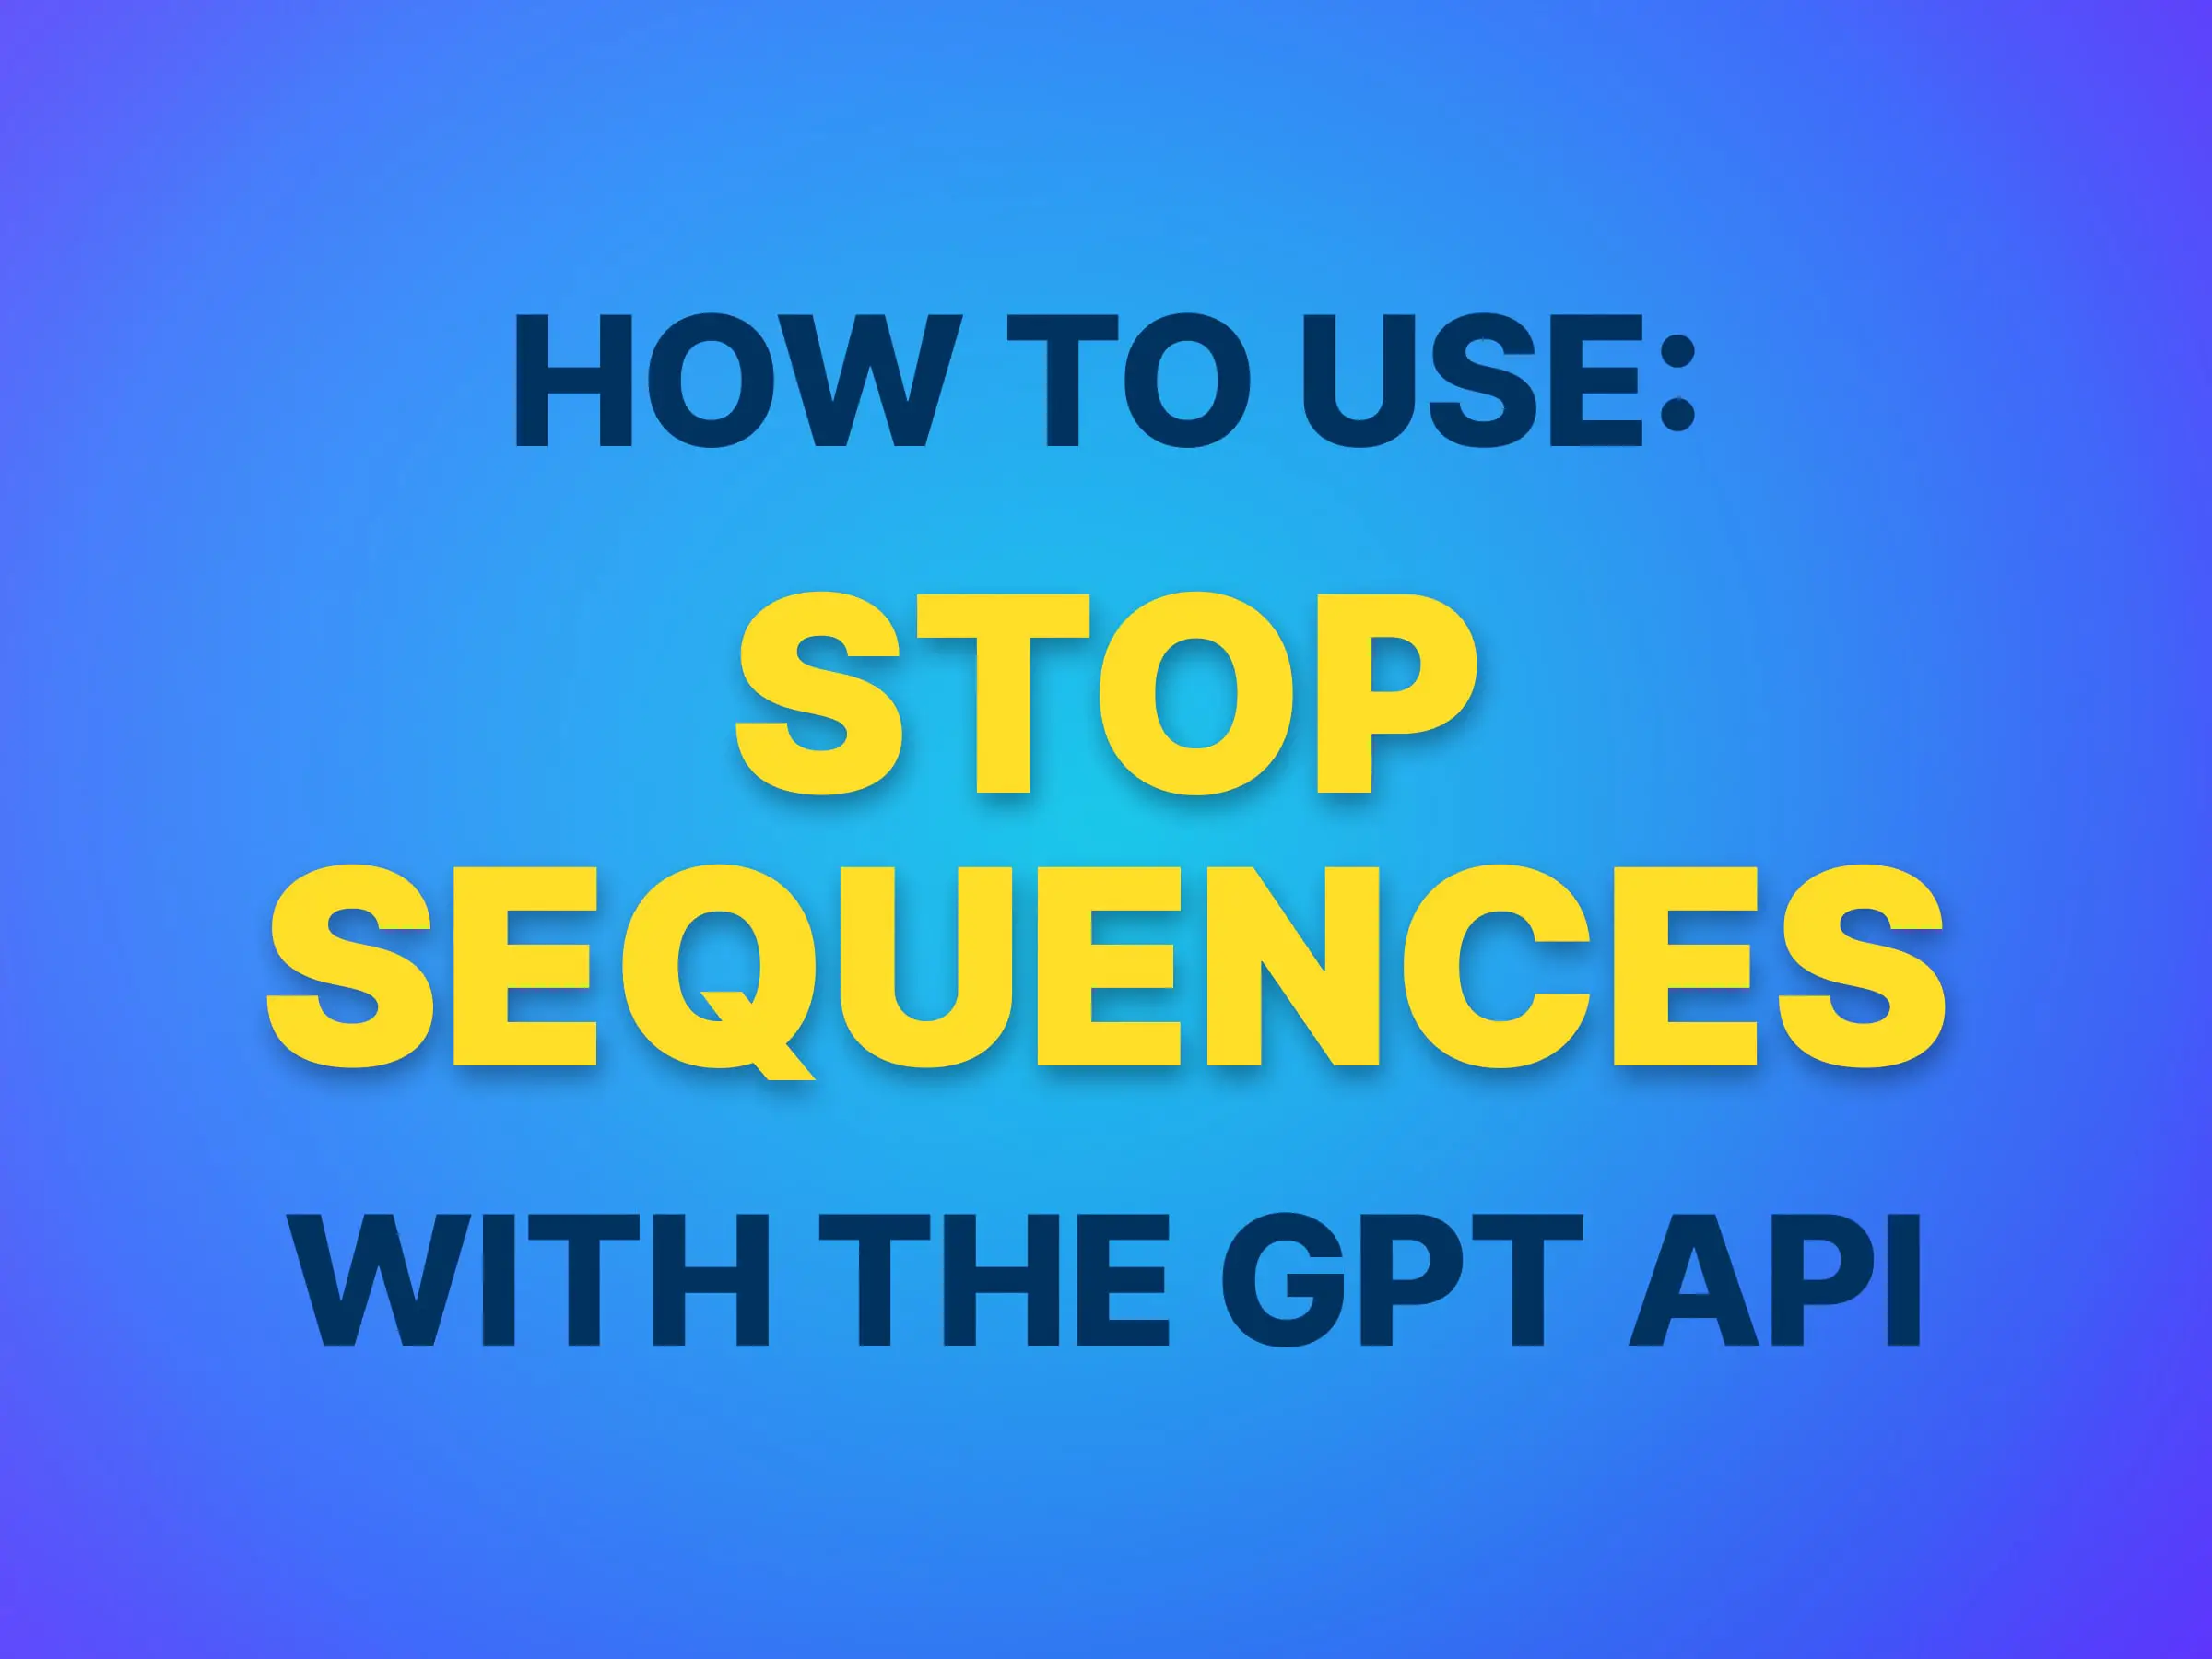 using stop sequences with gpt-4